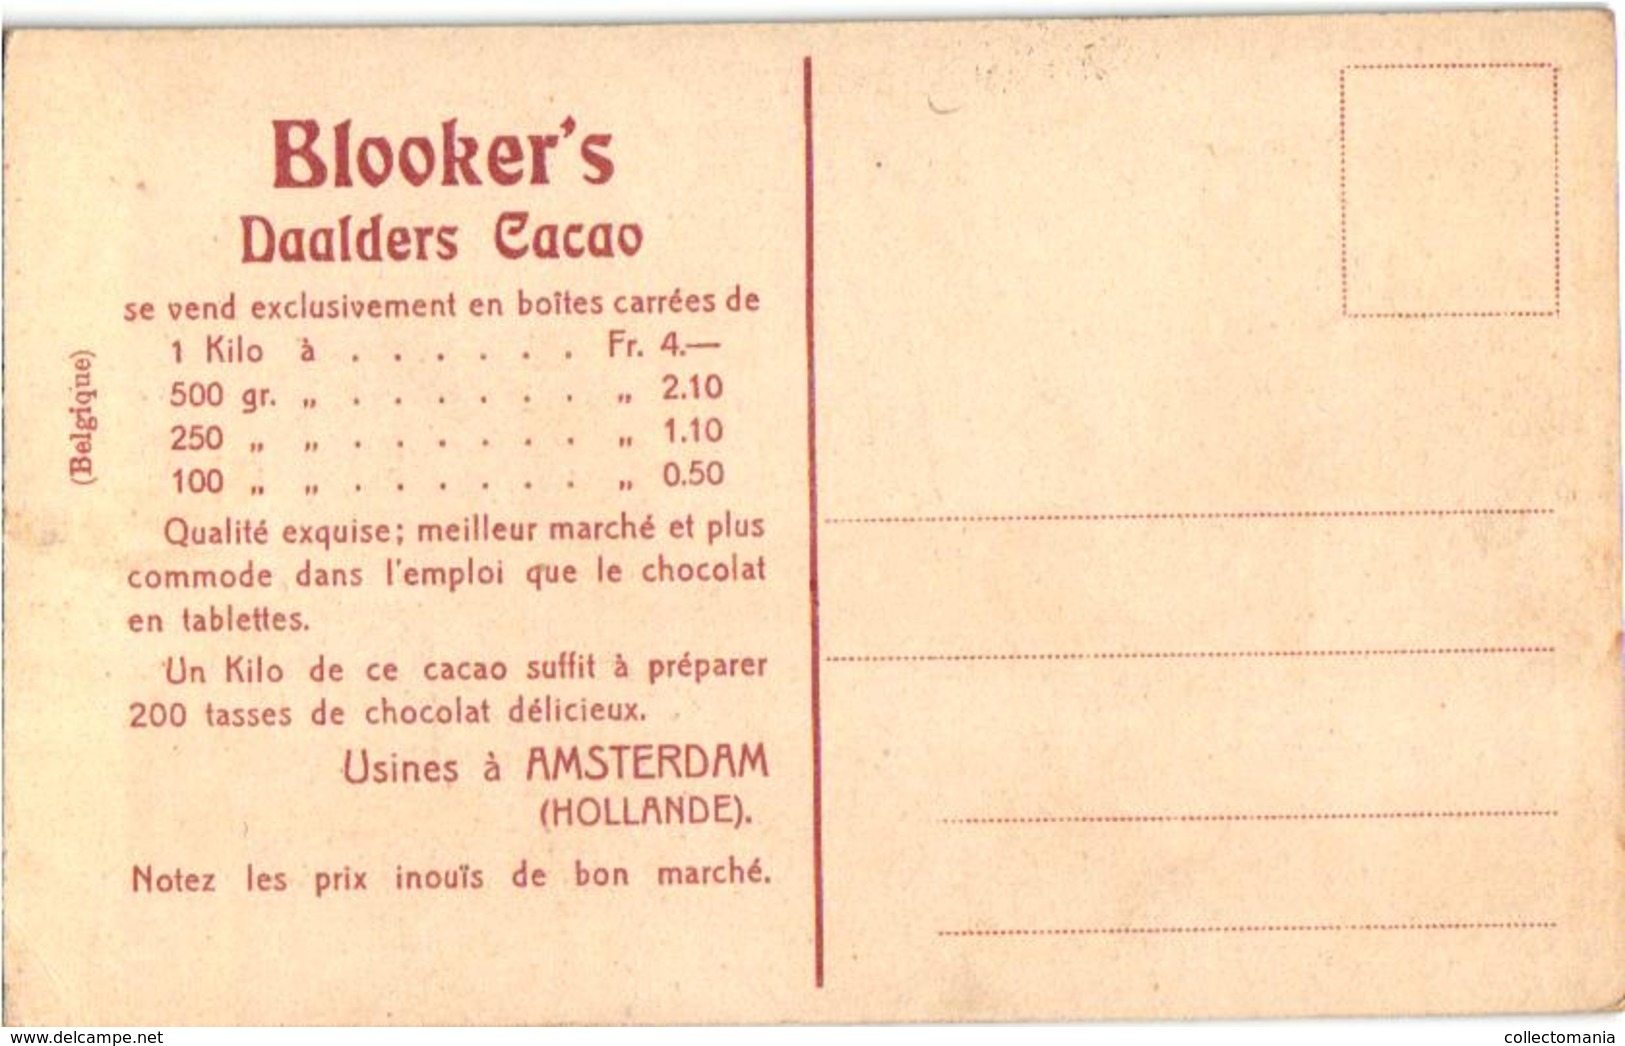 8 post cards c1900 Cacao Chocolat  Blooker's Holland Daalders Grrece Cheops Egypte Akropolis  1076 Orient